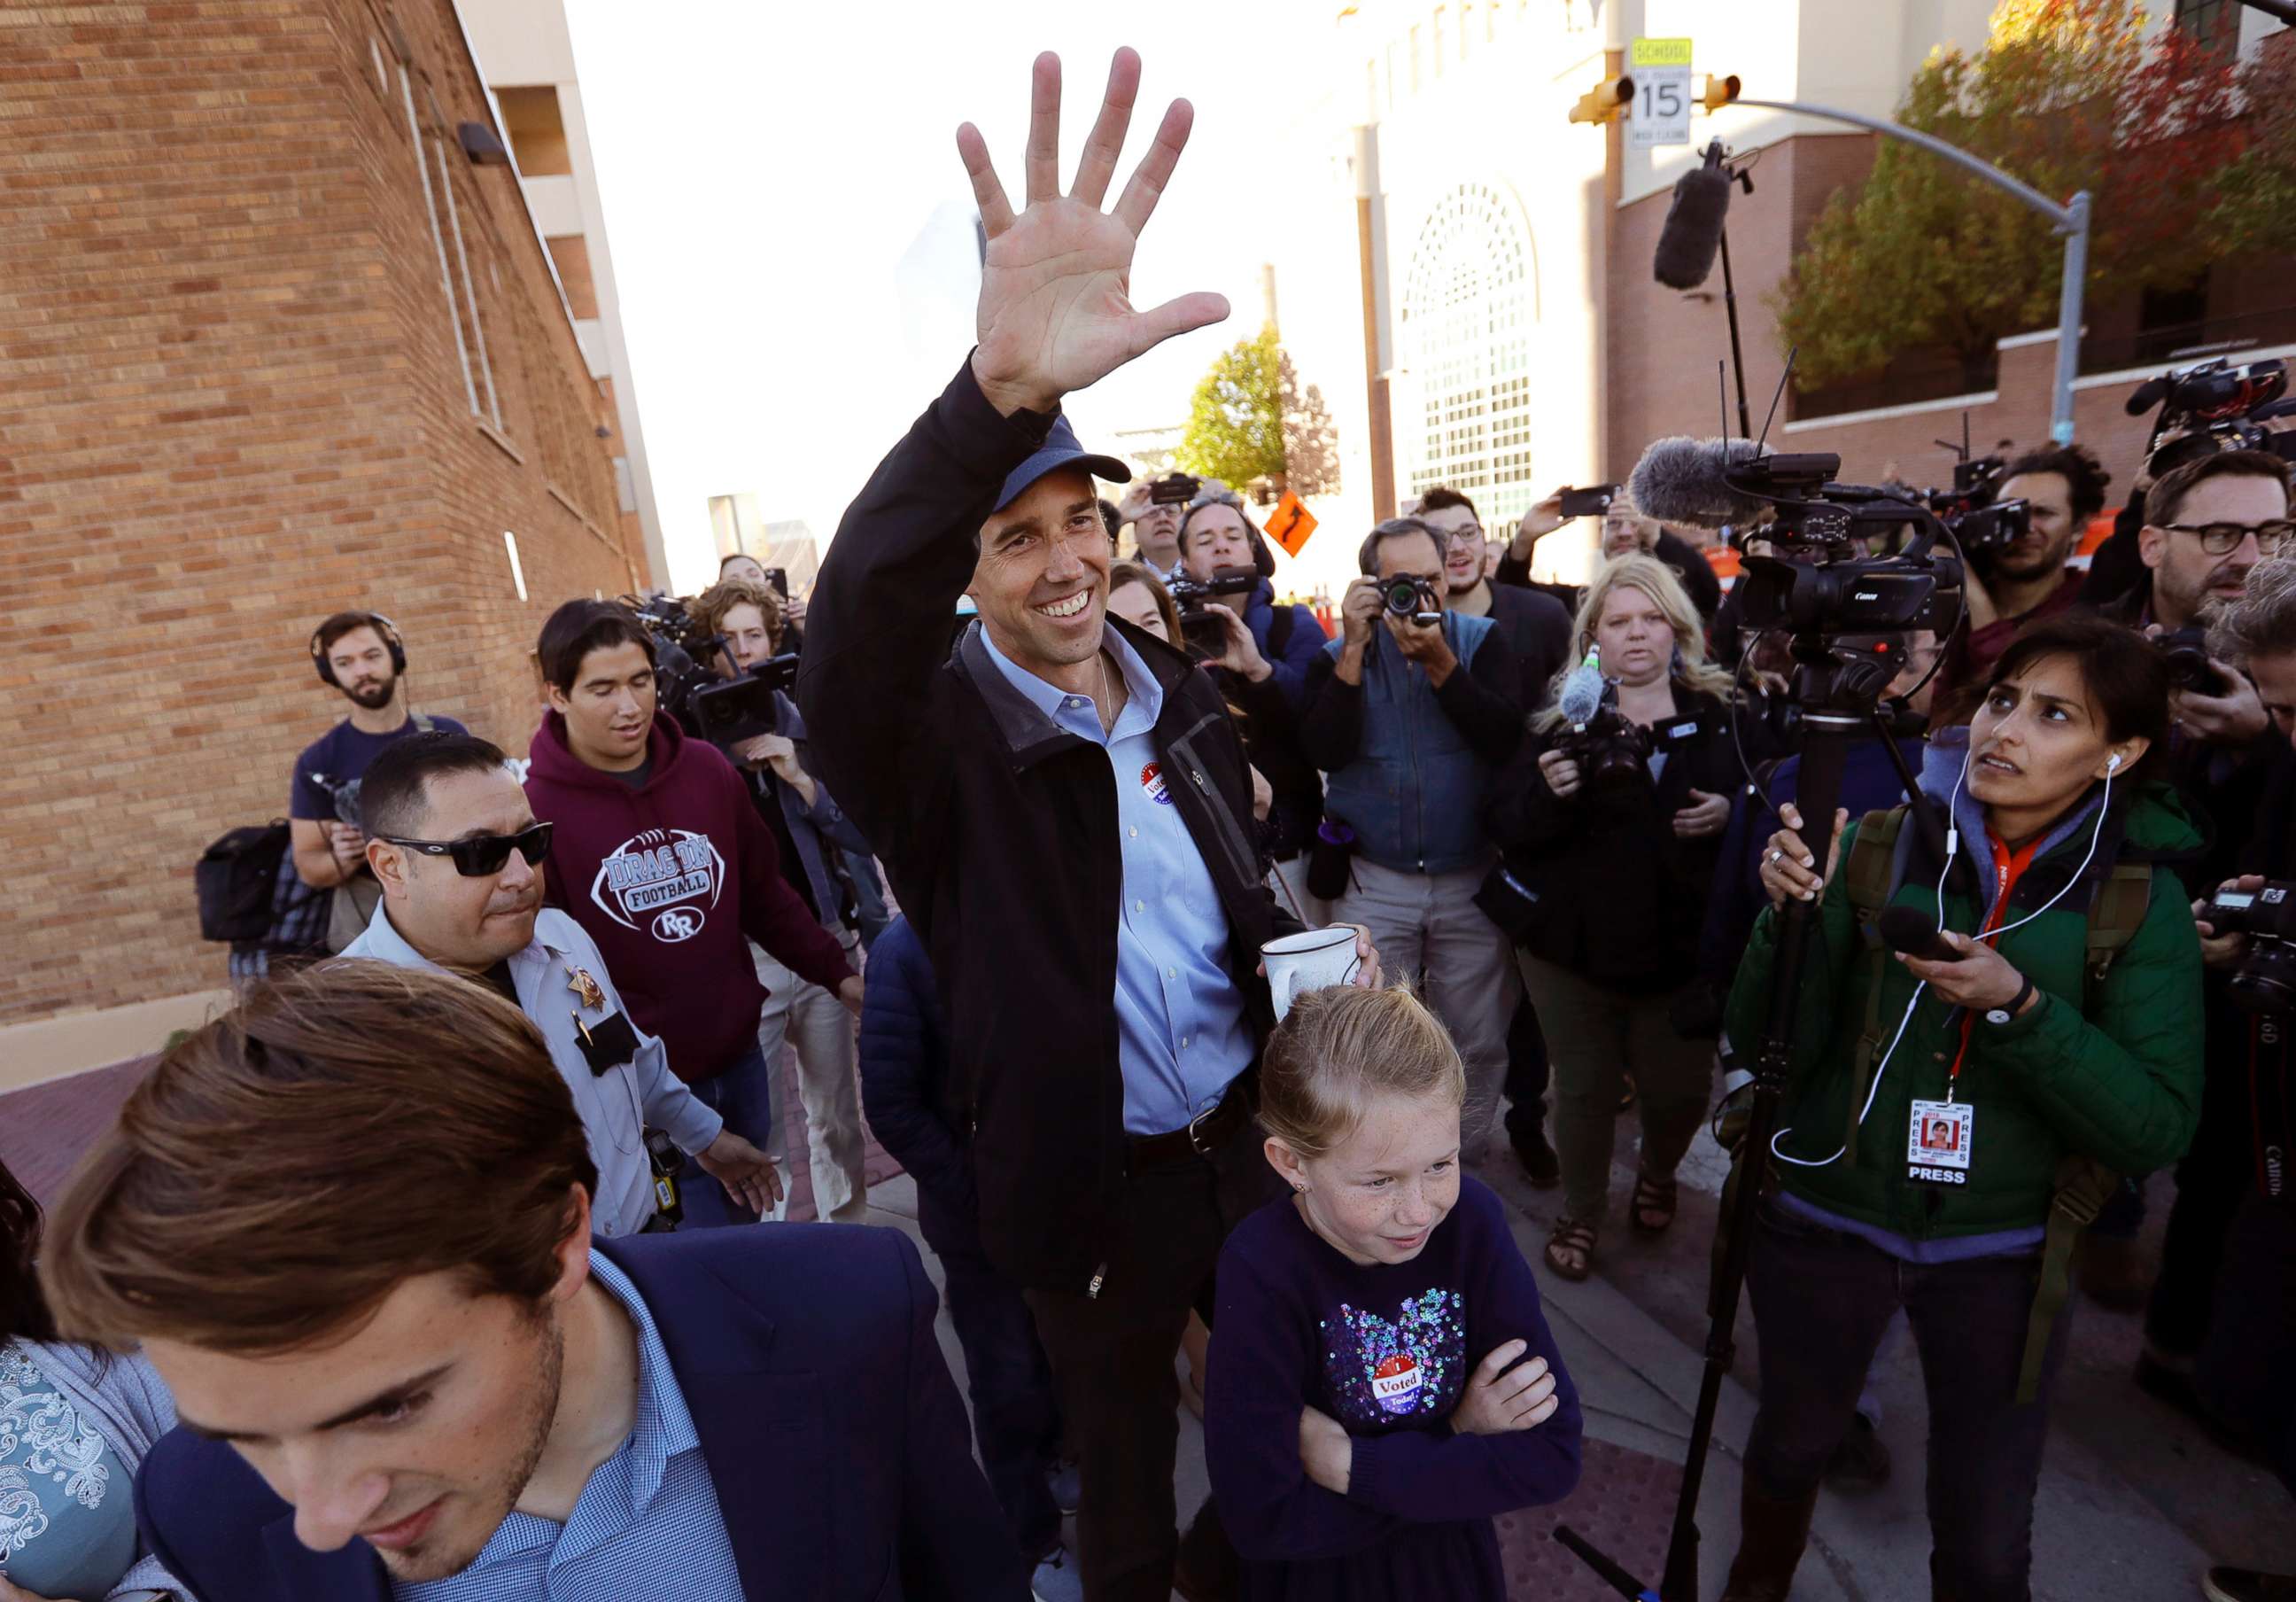 PHOTO: Rep. Beto O'Rourke, the 2018 Democratic Candidate for the Senate in Texas, waves to supporters as he leaves a polling place with his family after voting, Nov. 6, 2018, in El Paso, Texas.